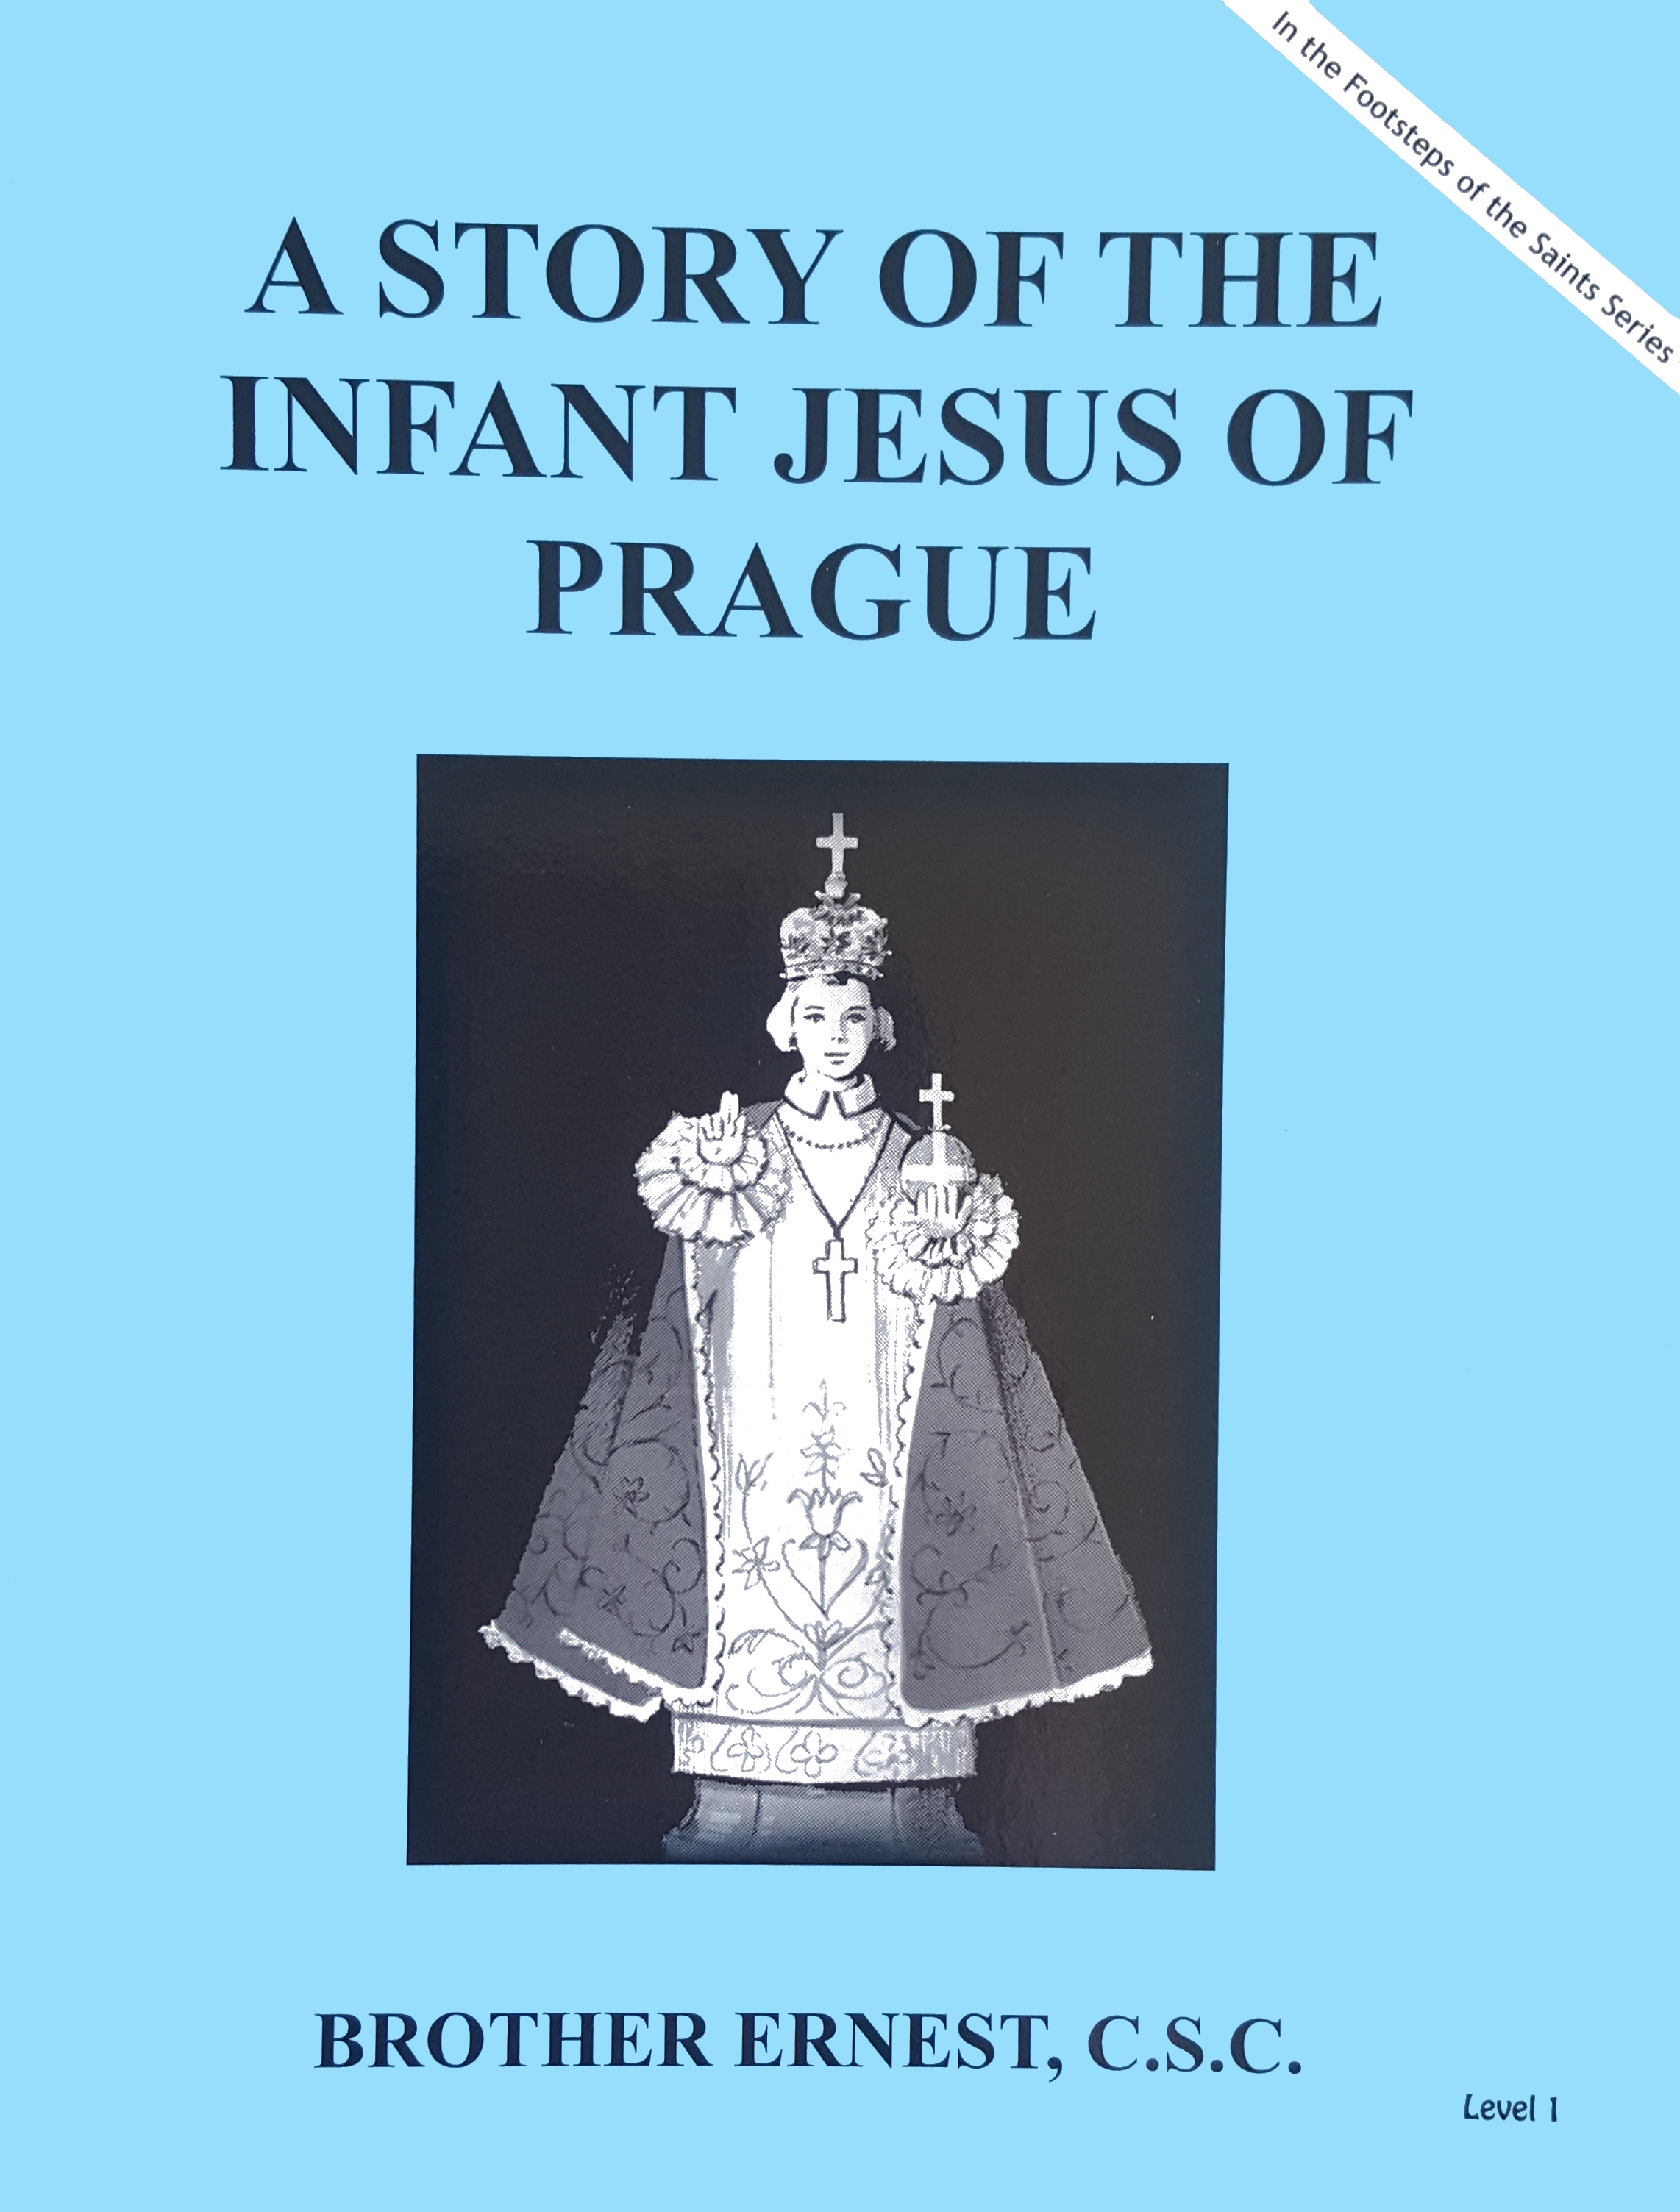 A Story of The Infant Jesus of Prague, In the Footsteps of the Saints Series